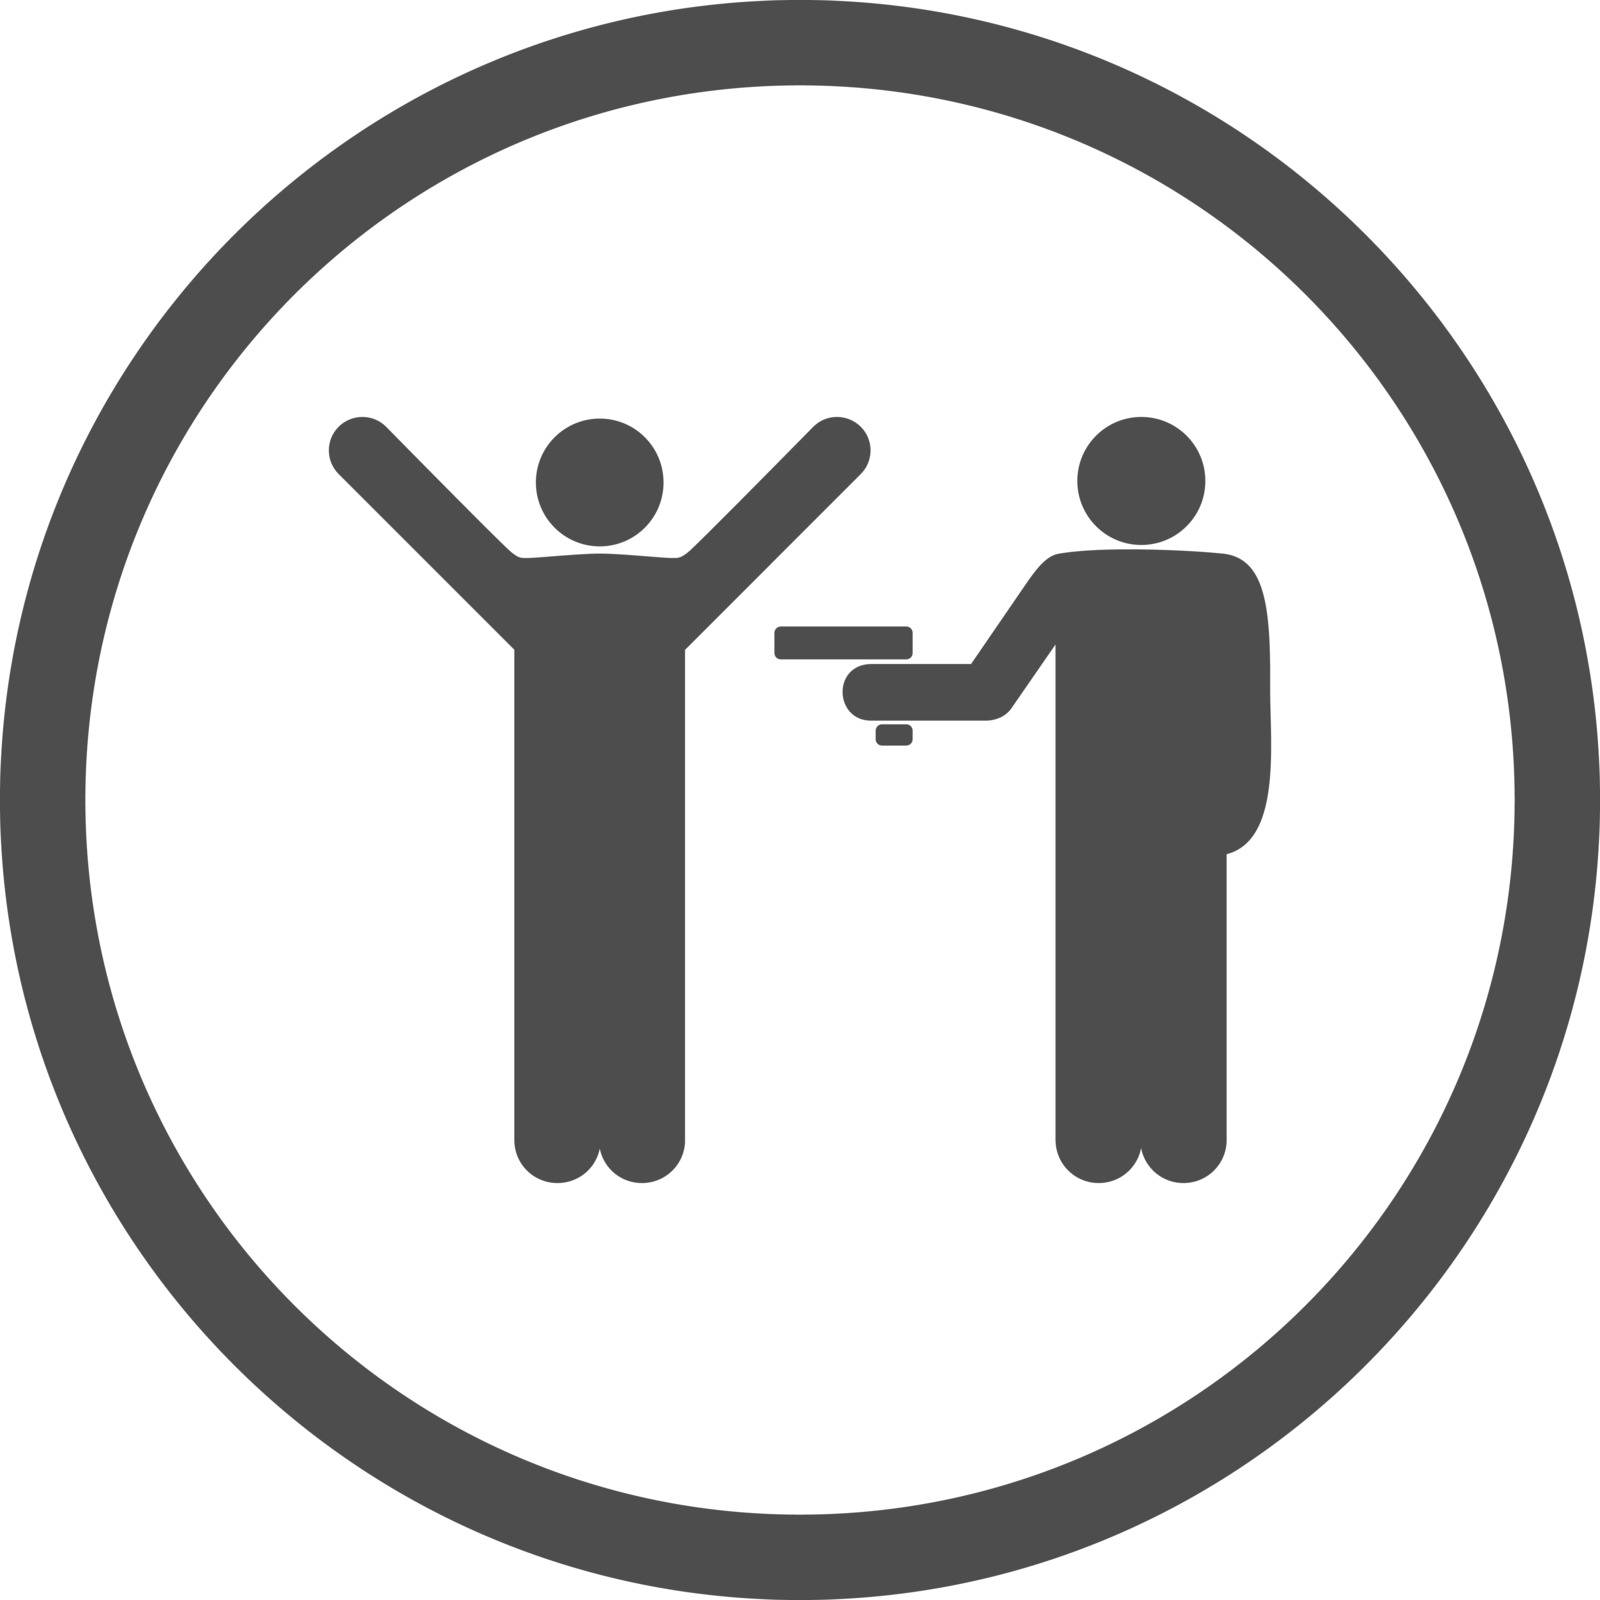 Crime vector icon. This rounded flat symbol is drawn with gray color on a white background.